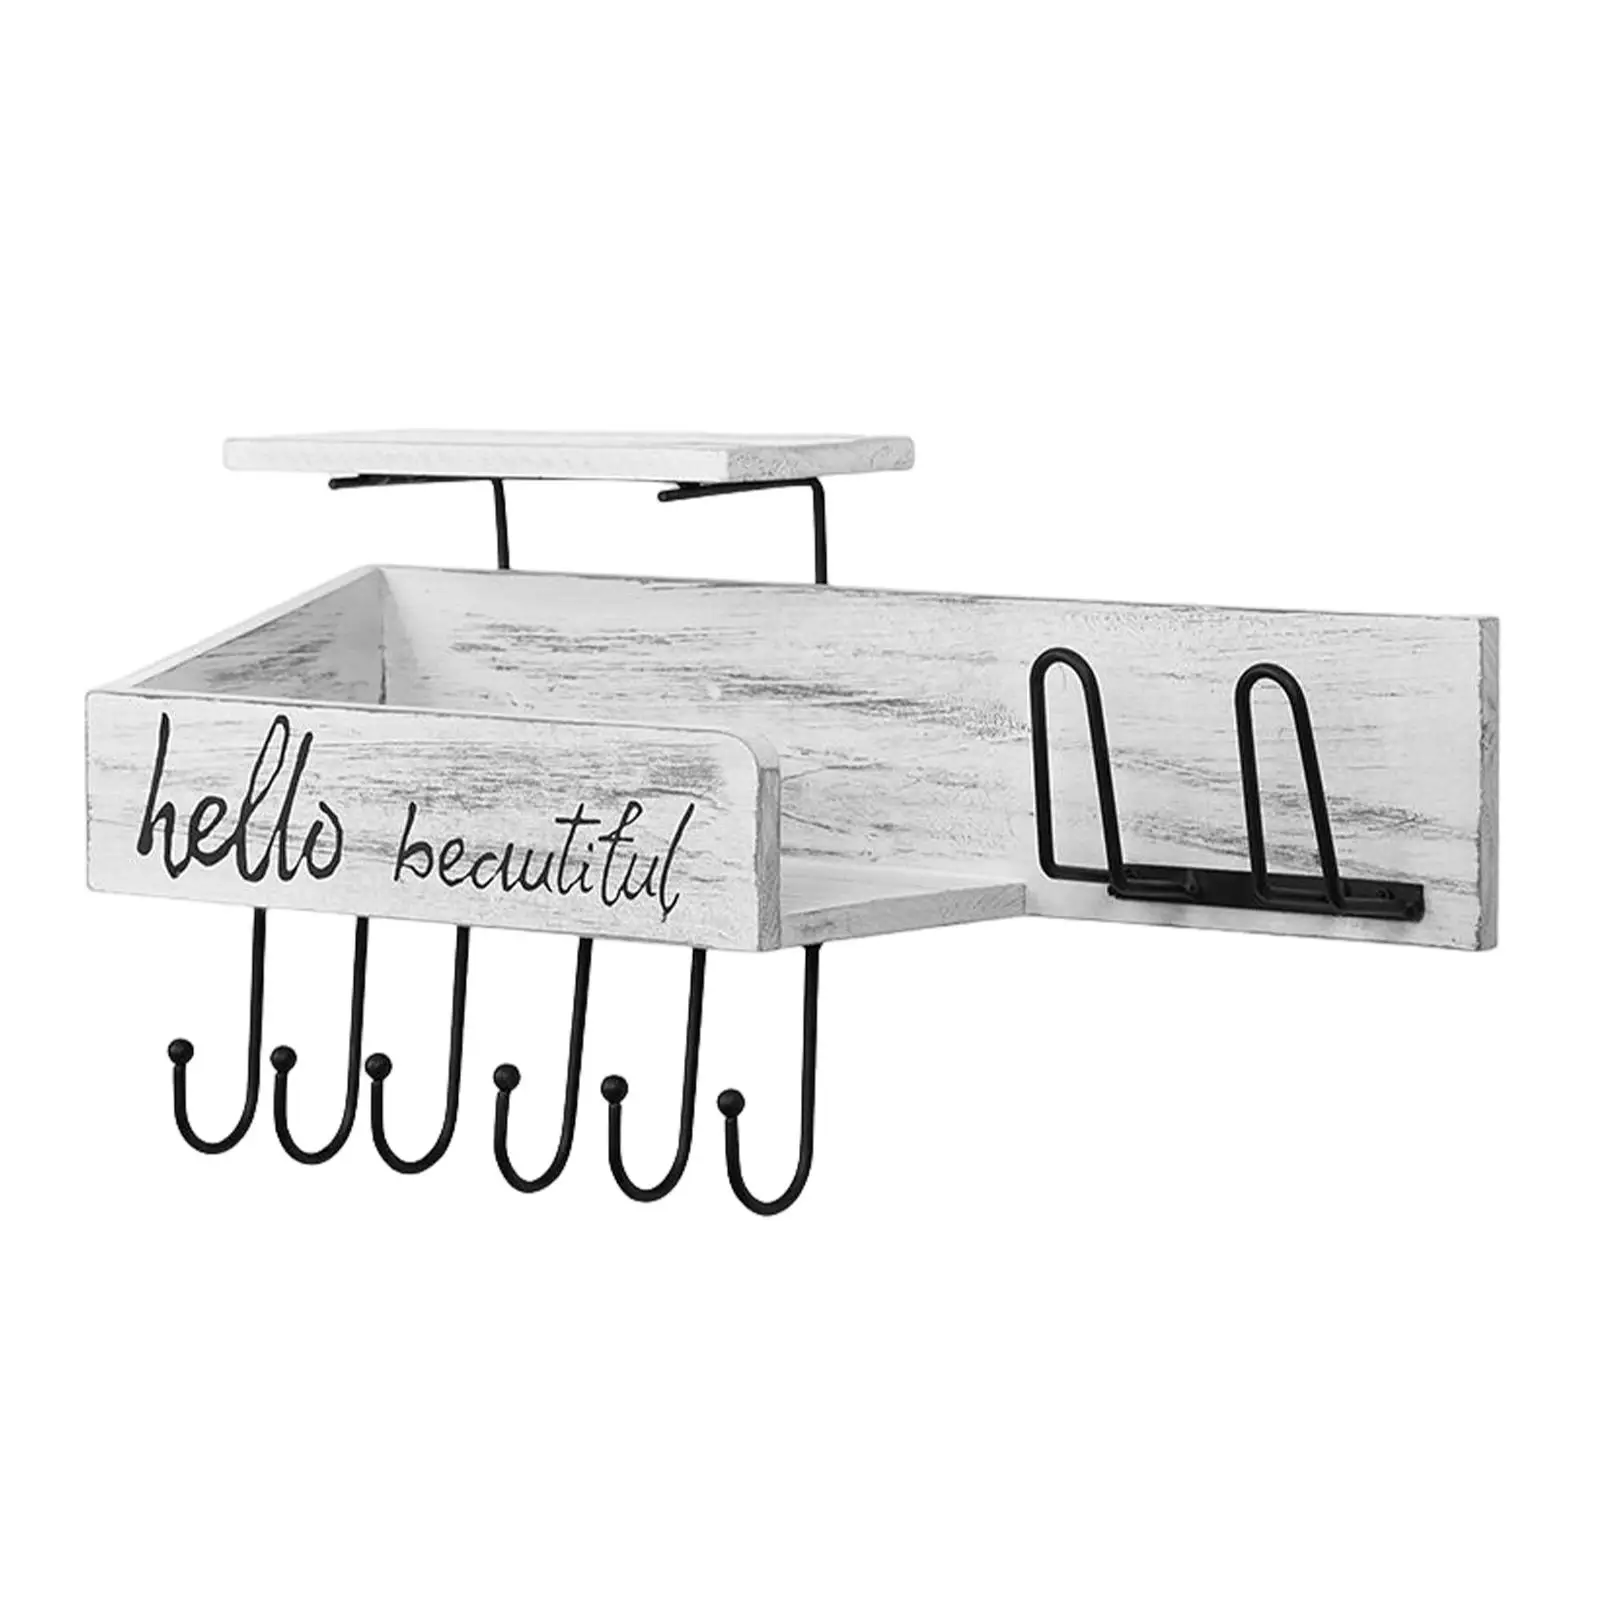 

Rustic Wall Mounted Key Holder Hooks Rack Ornament Entryway Hallway Wooden Mail